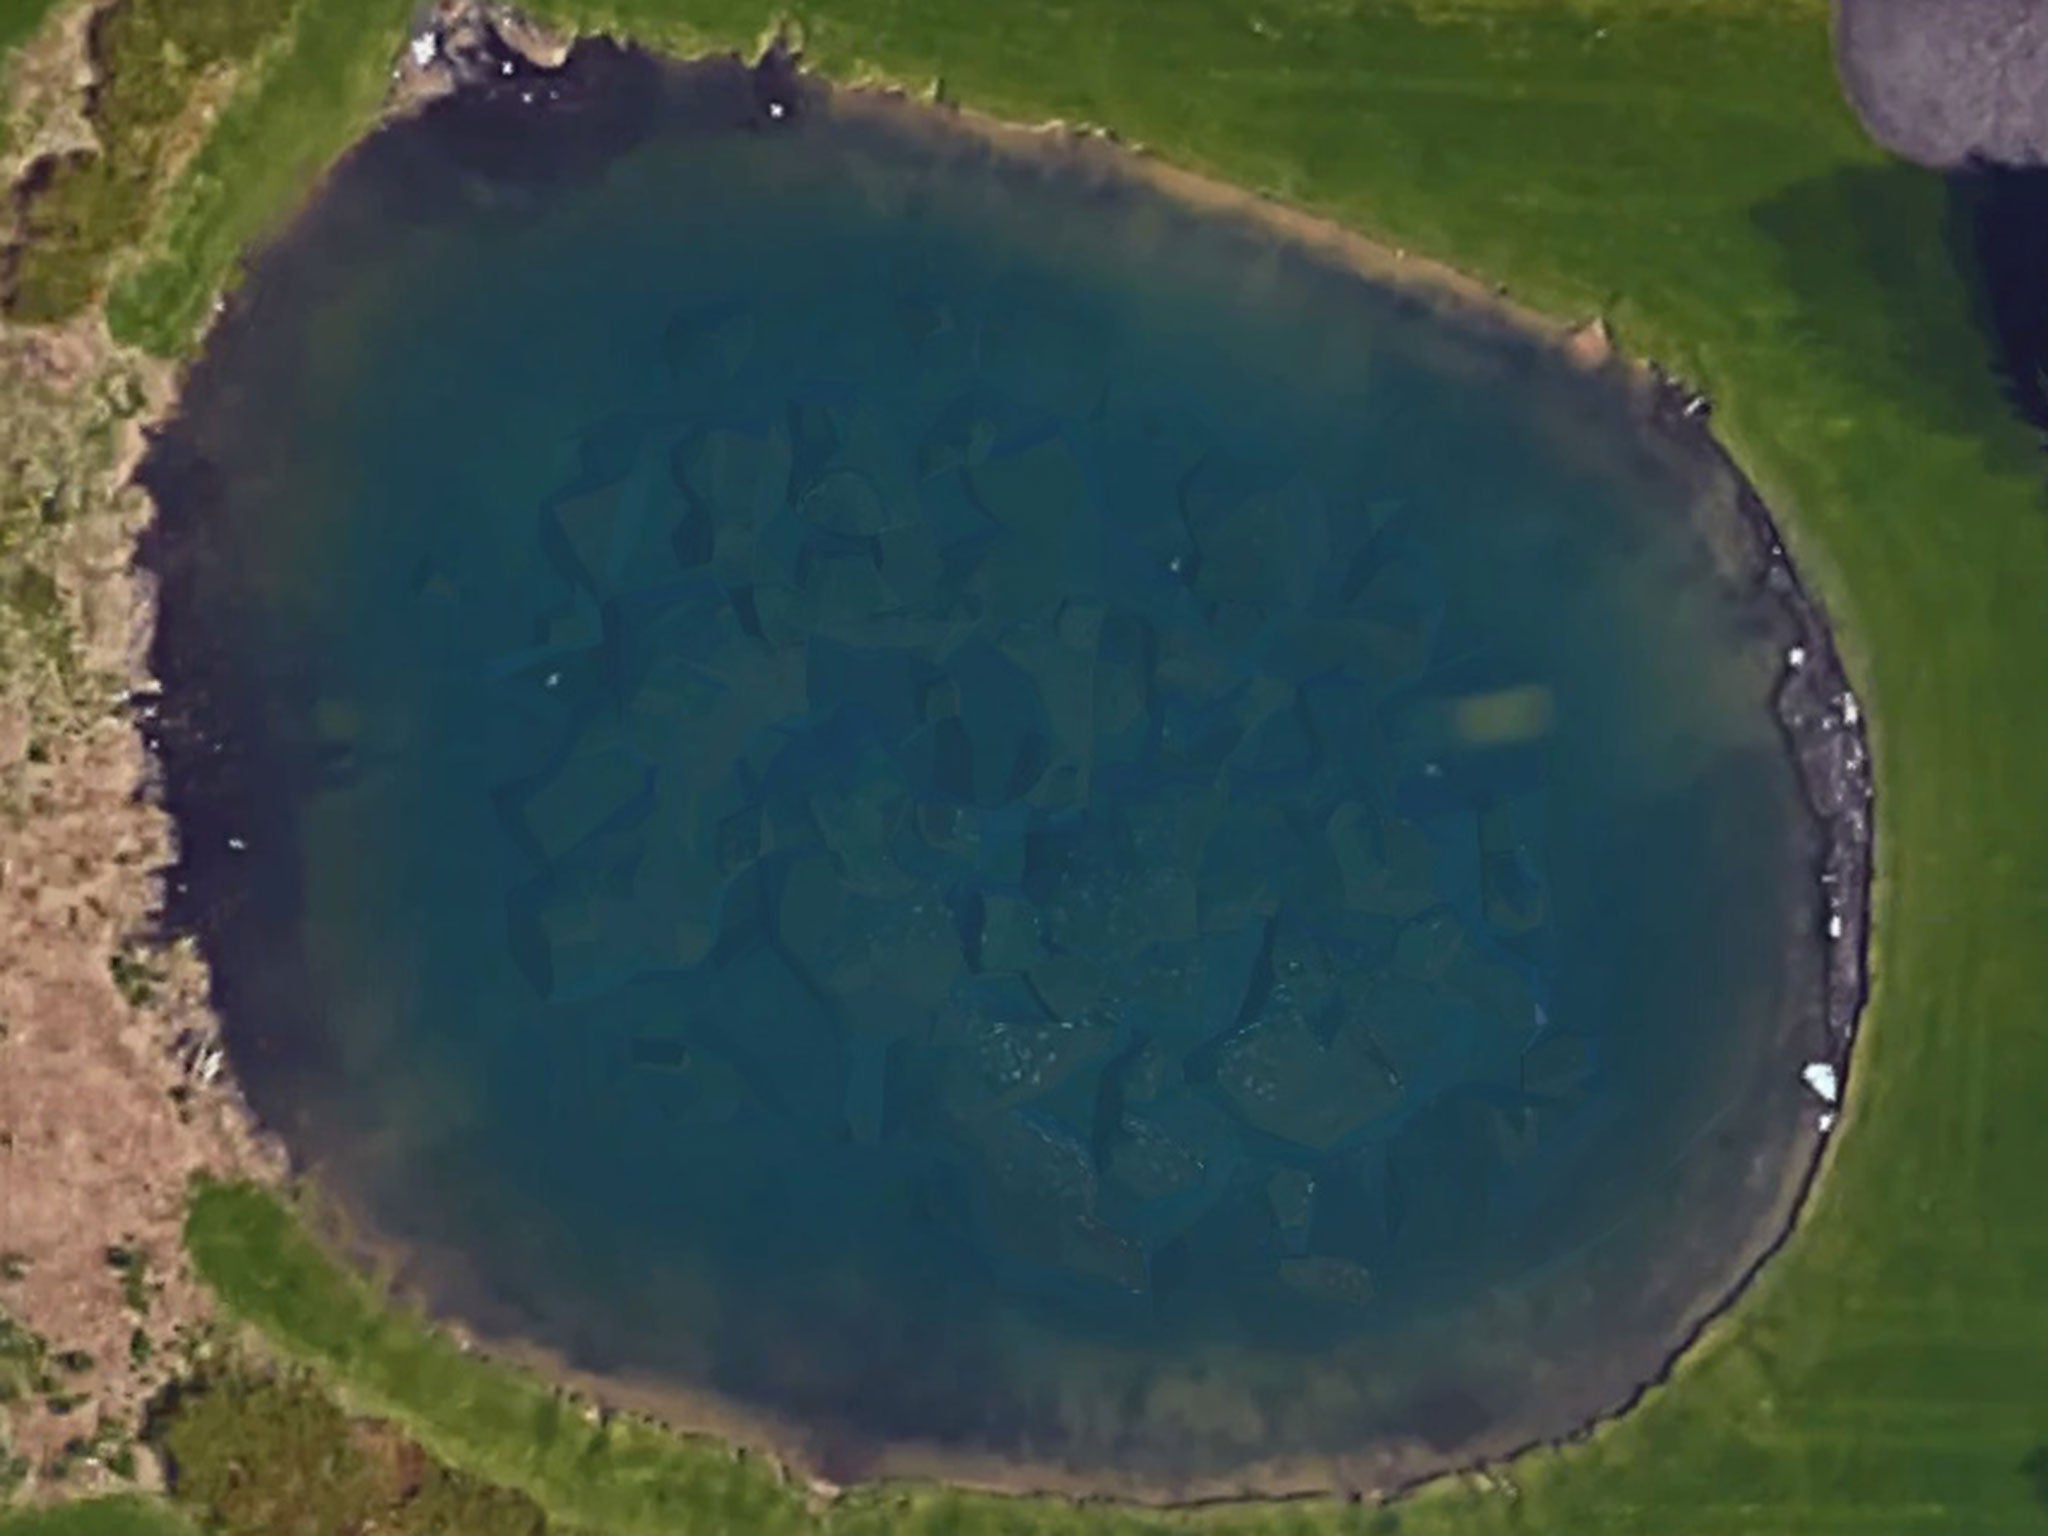 Davie Lee Niles was found in a submerged car, seen in the top right-hand corner of the pond on Google Maps